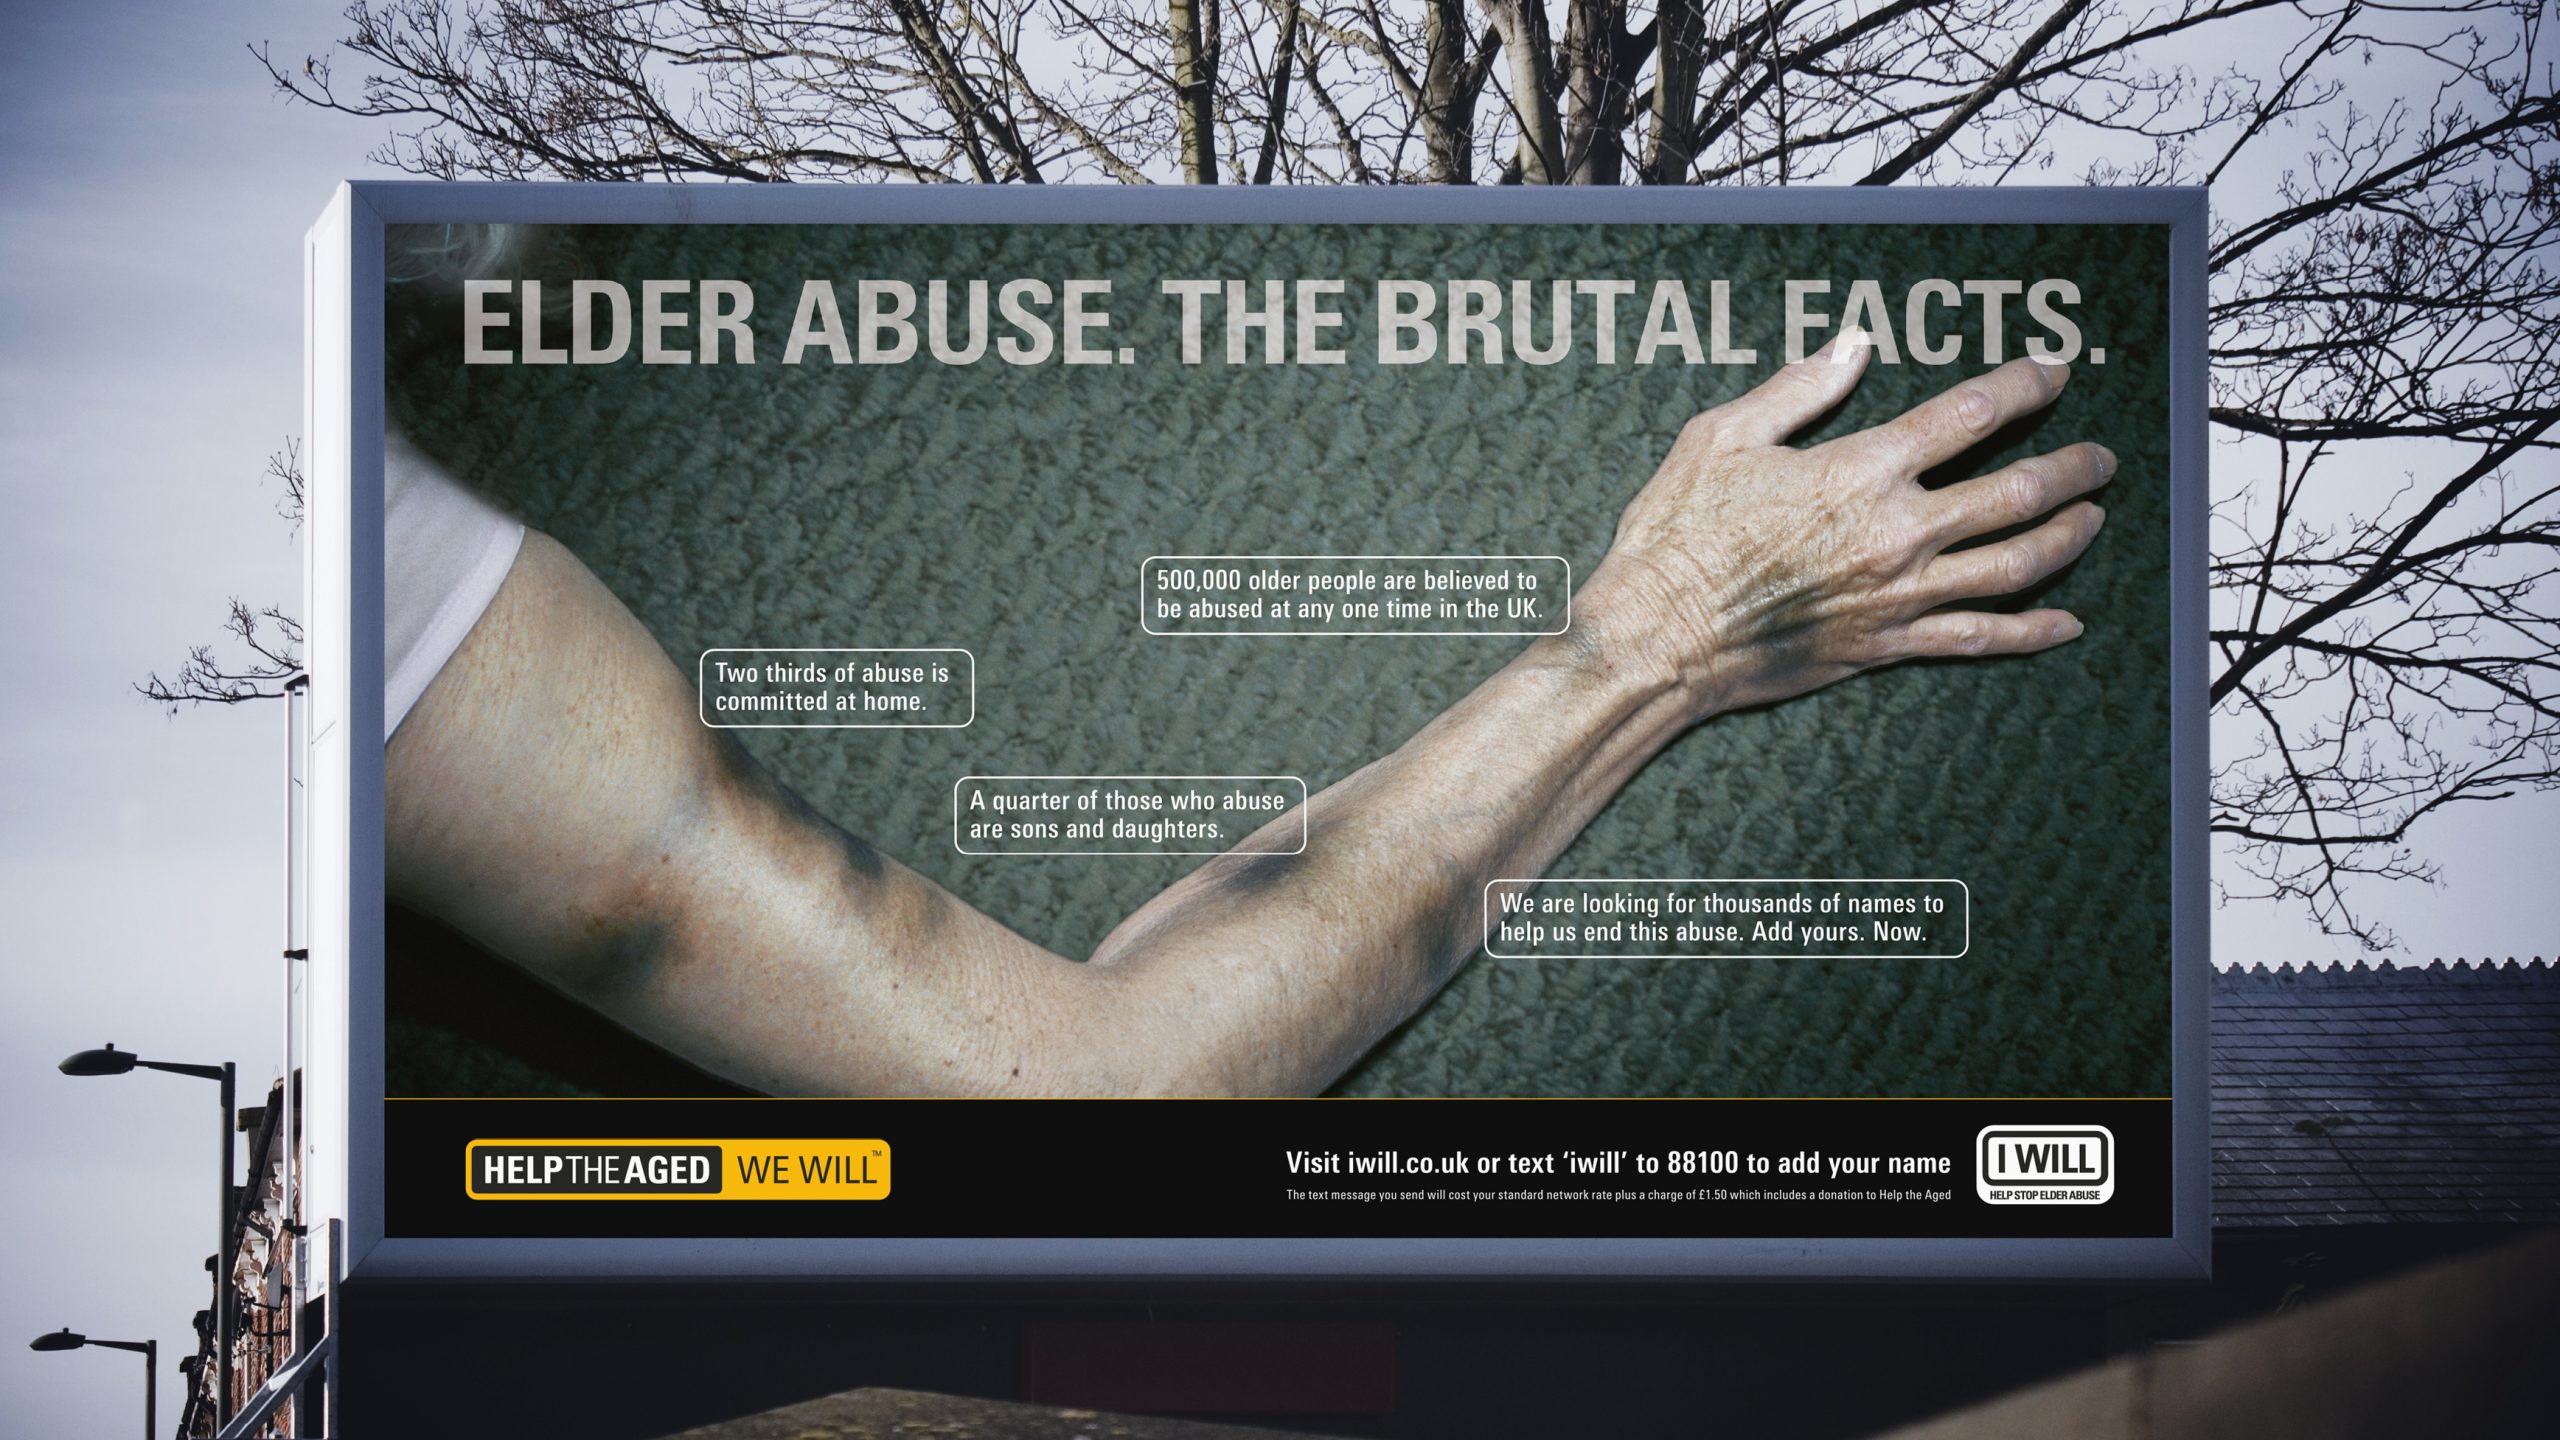 Entity-3-Three-Brand-Design-Agency-Sydney-Help-the-Aged-4-experience-elder-abuse-campaign-ooh-advertising